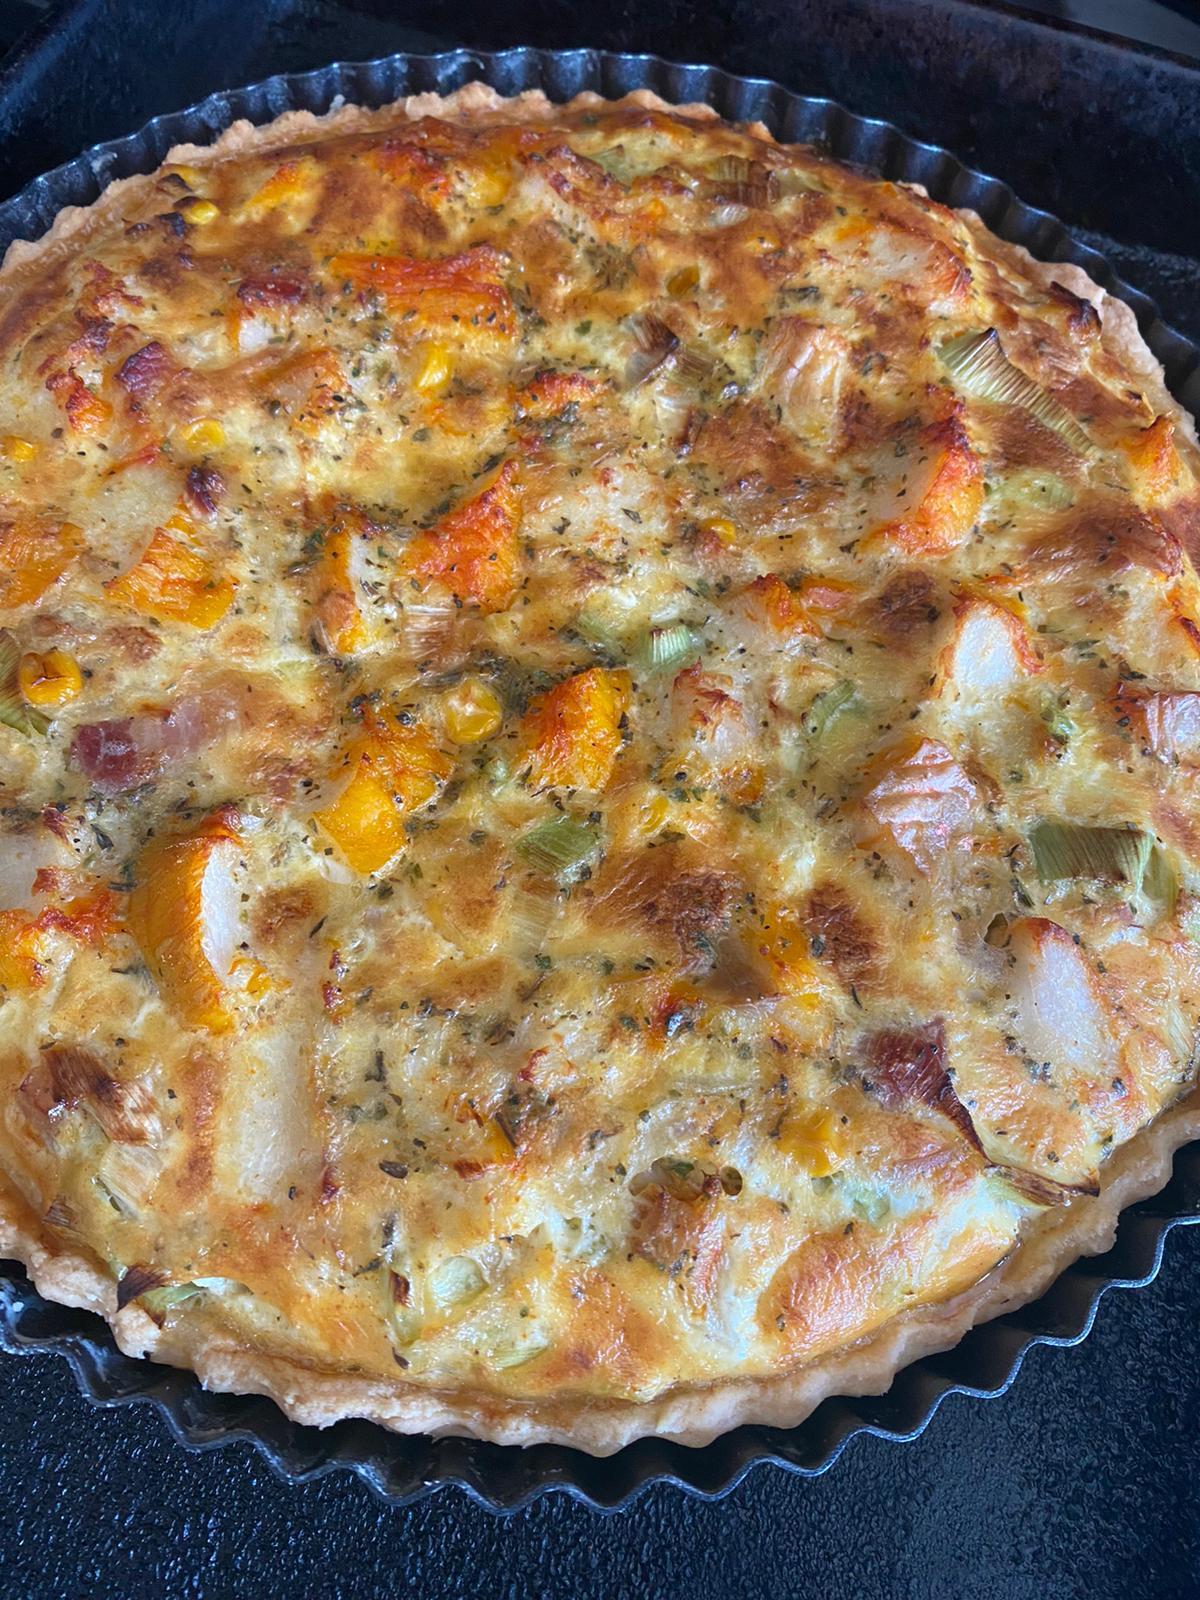 Smoked Hake, Smoked Bacon & Leek Quiche by Siobhán Devereux Doyle